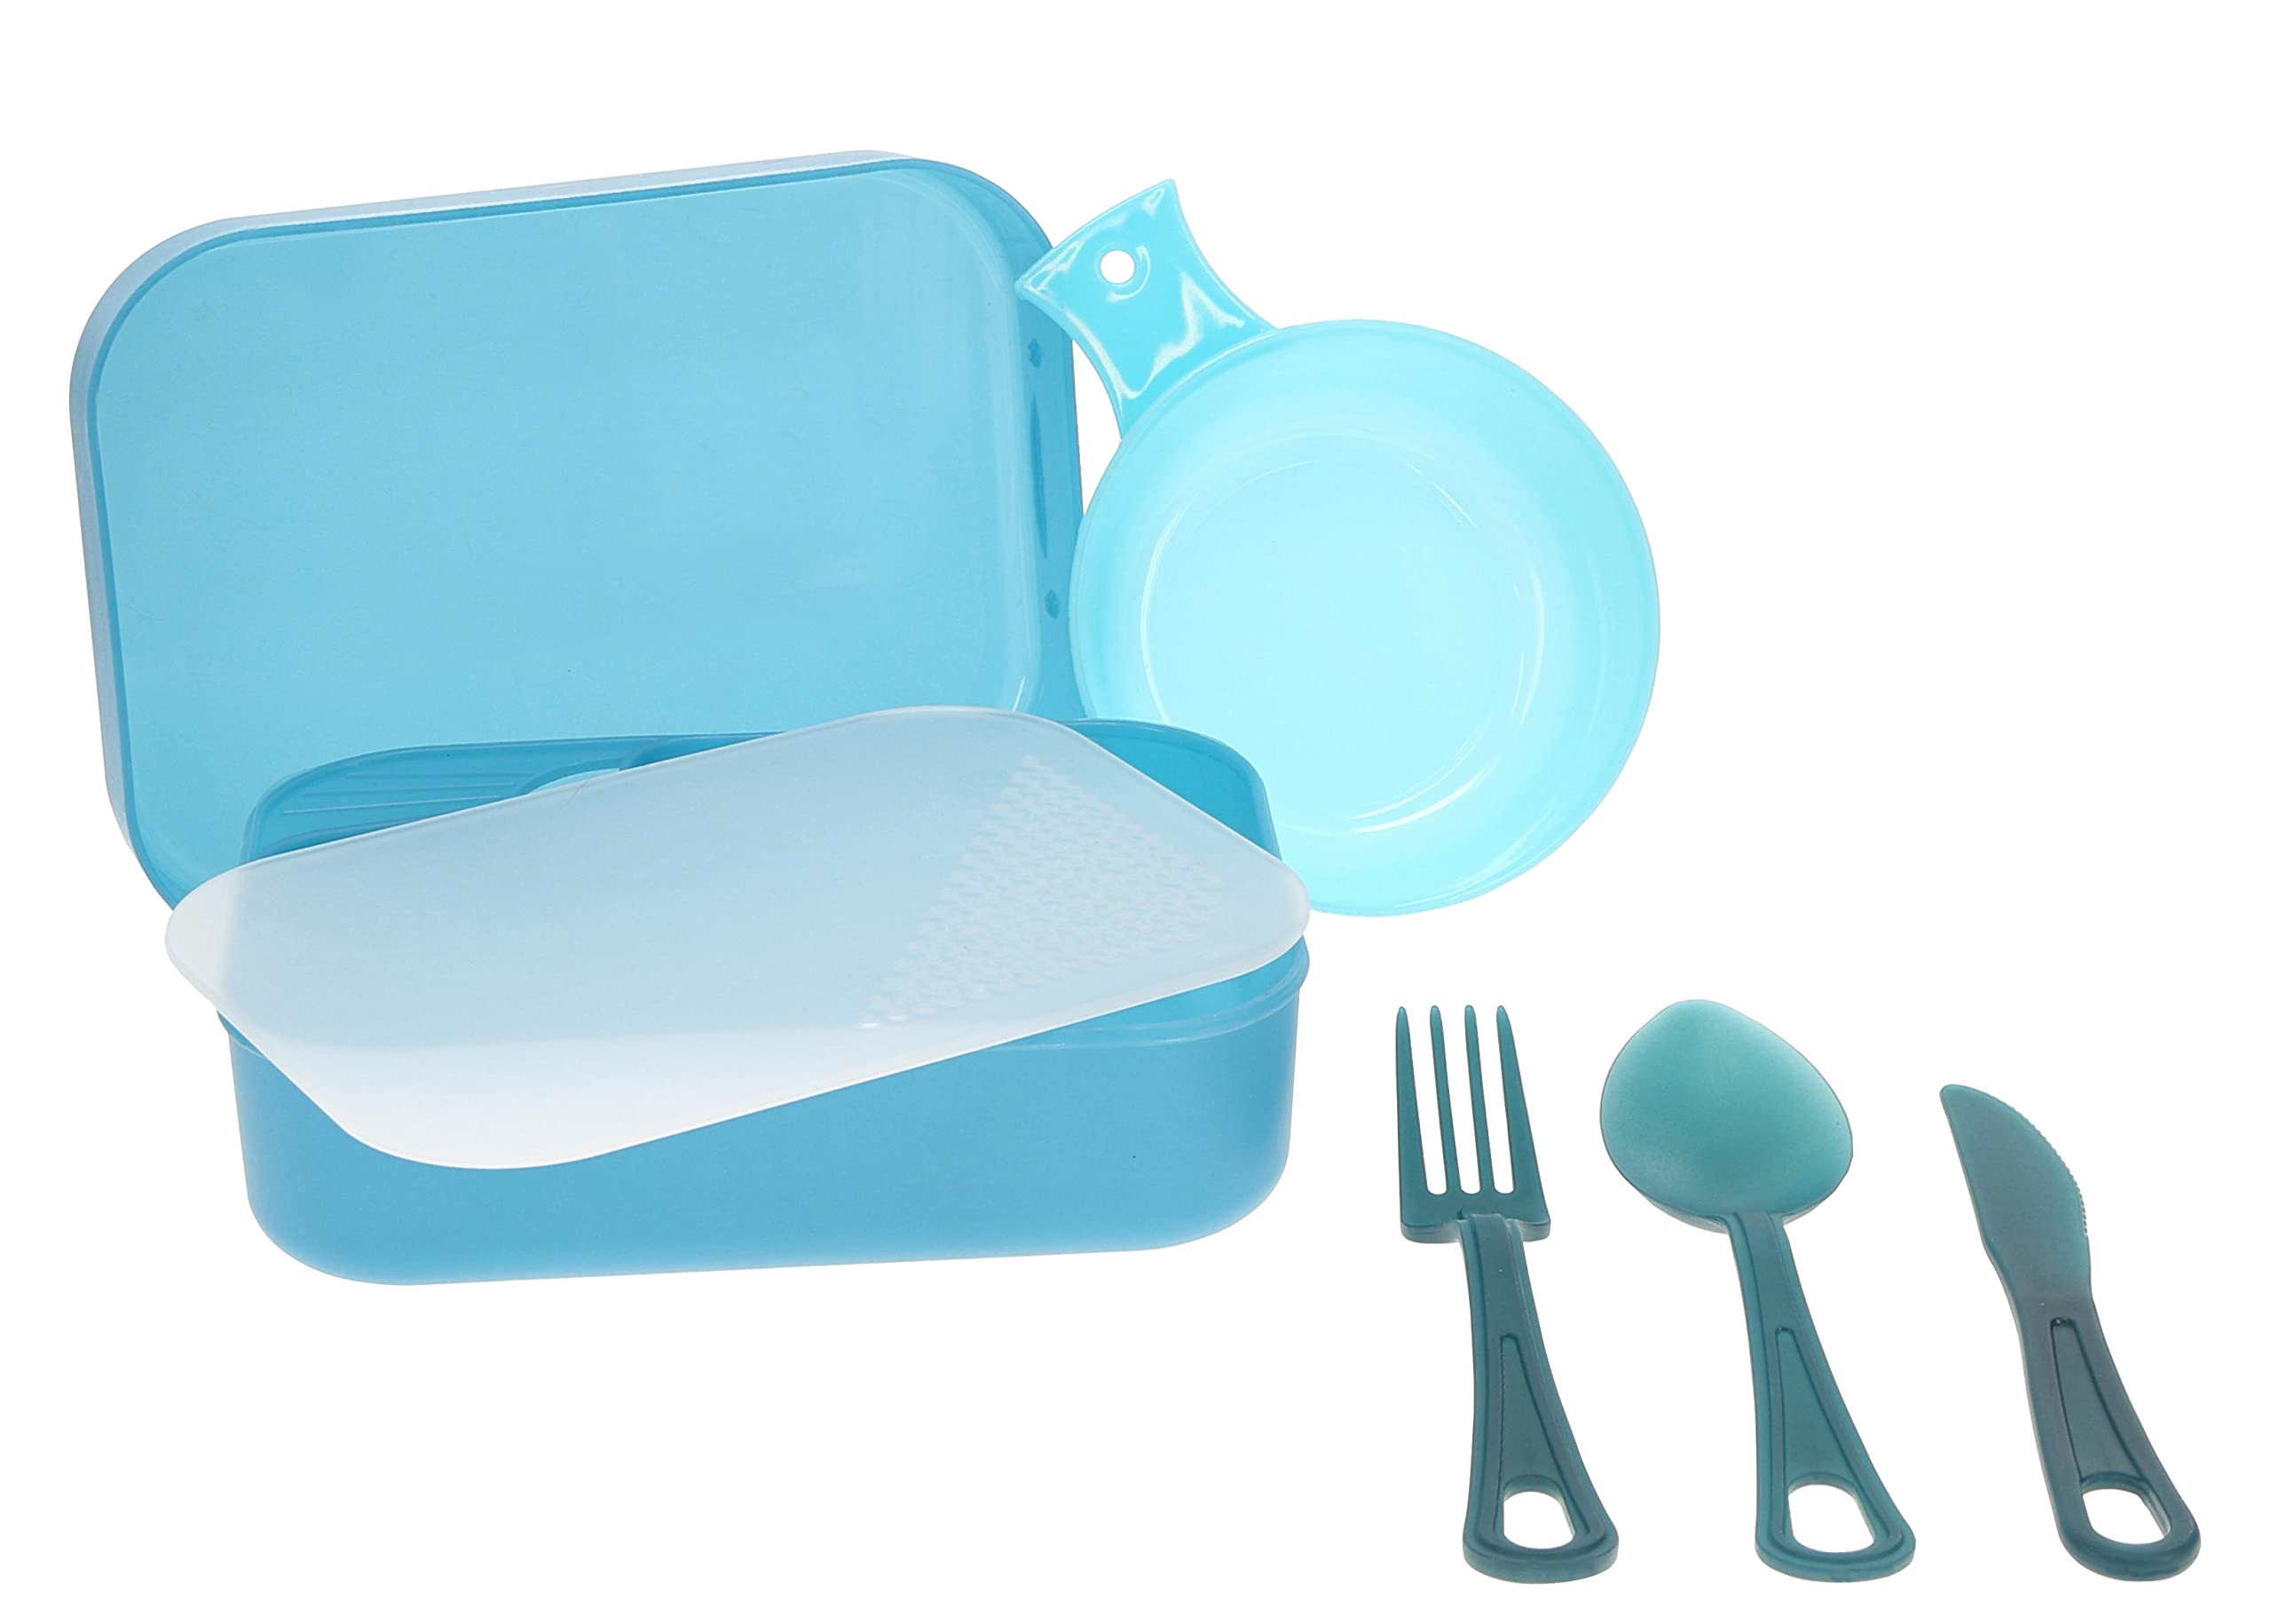 UST PackWare Mess Kit with Self Contained, BPA Free Construction